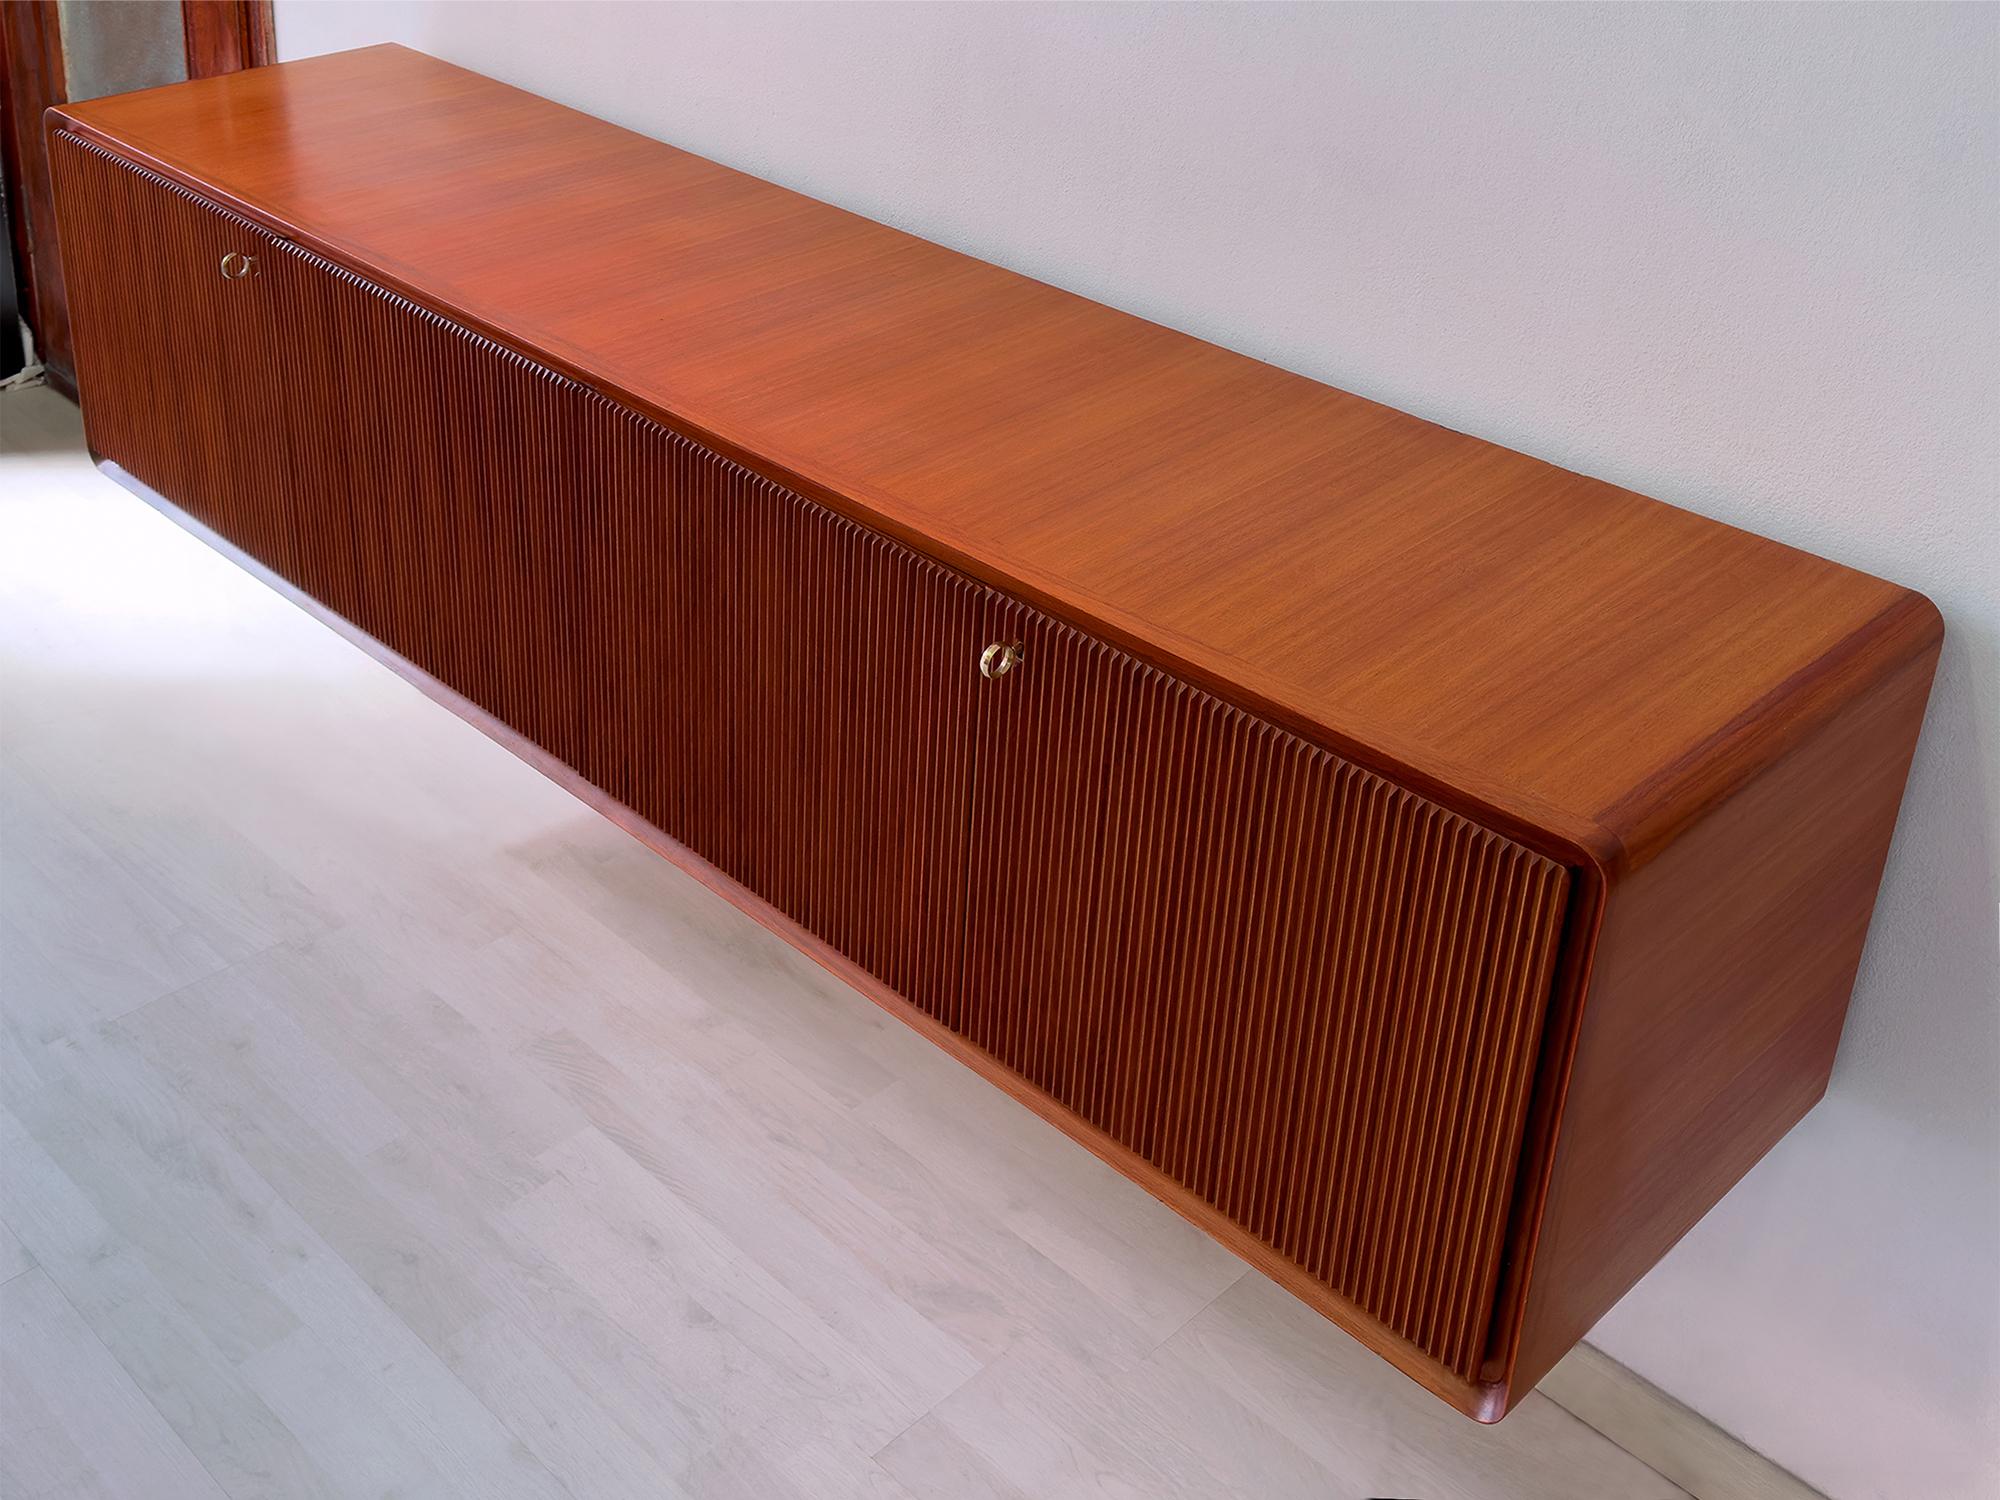 This magnificent Italian Sideboard in teak wood is a stunning example of the exceptional craftsmanship produced by the Consorzio Esposizione Mobili Cantù in the 1950s.
Founded in 1949, the consortium aimed to bring together the best of Canturina